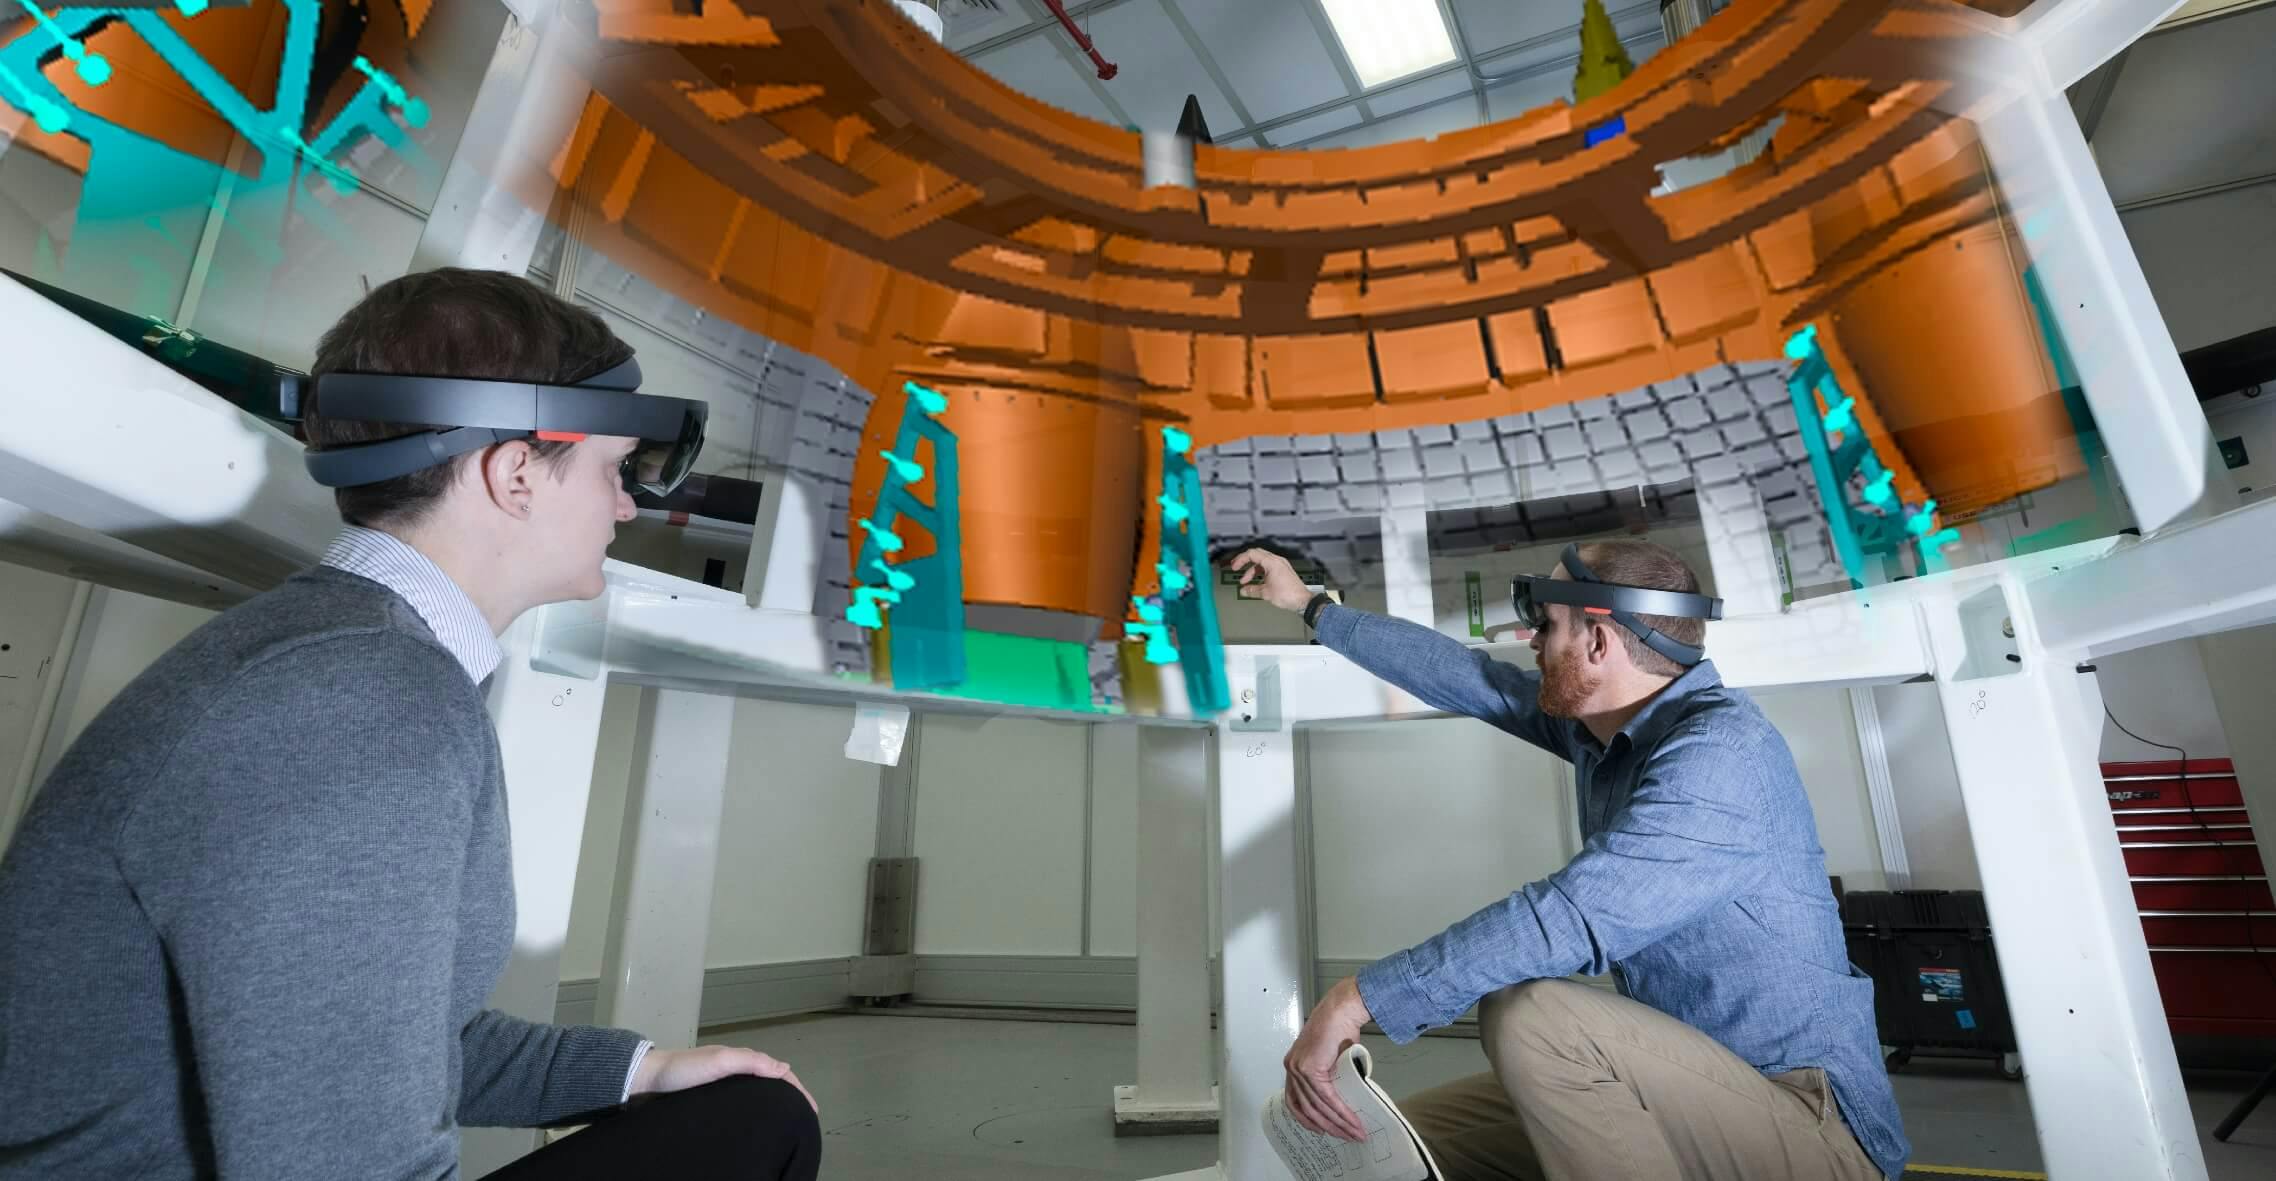 Two people wearing VR headsets collaborating on a project